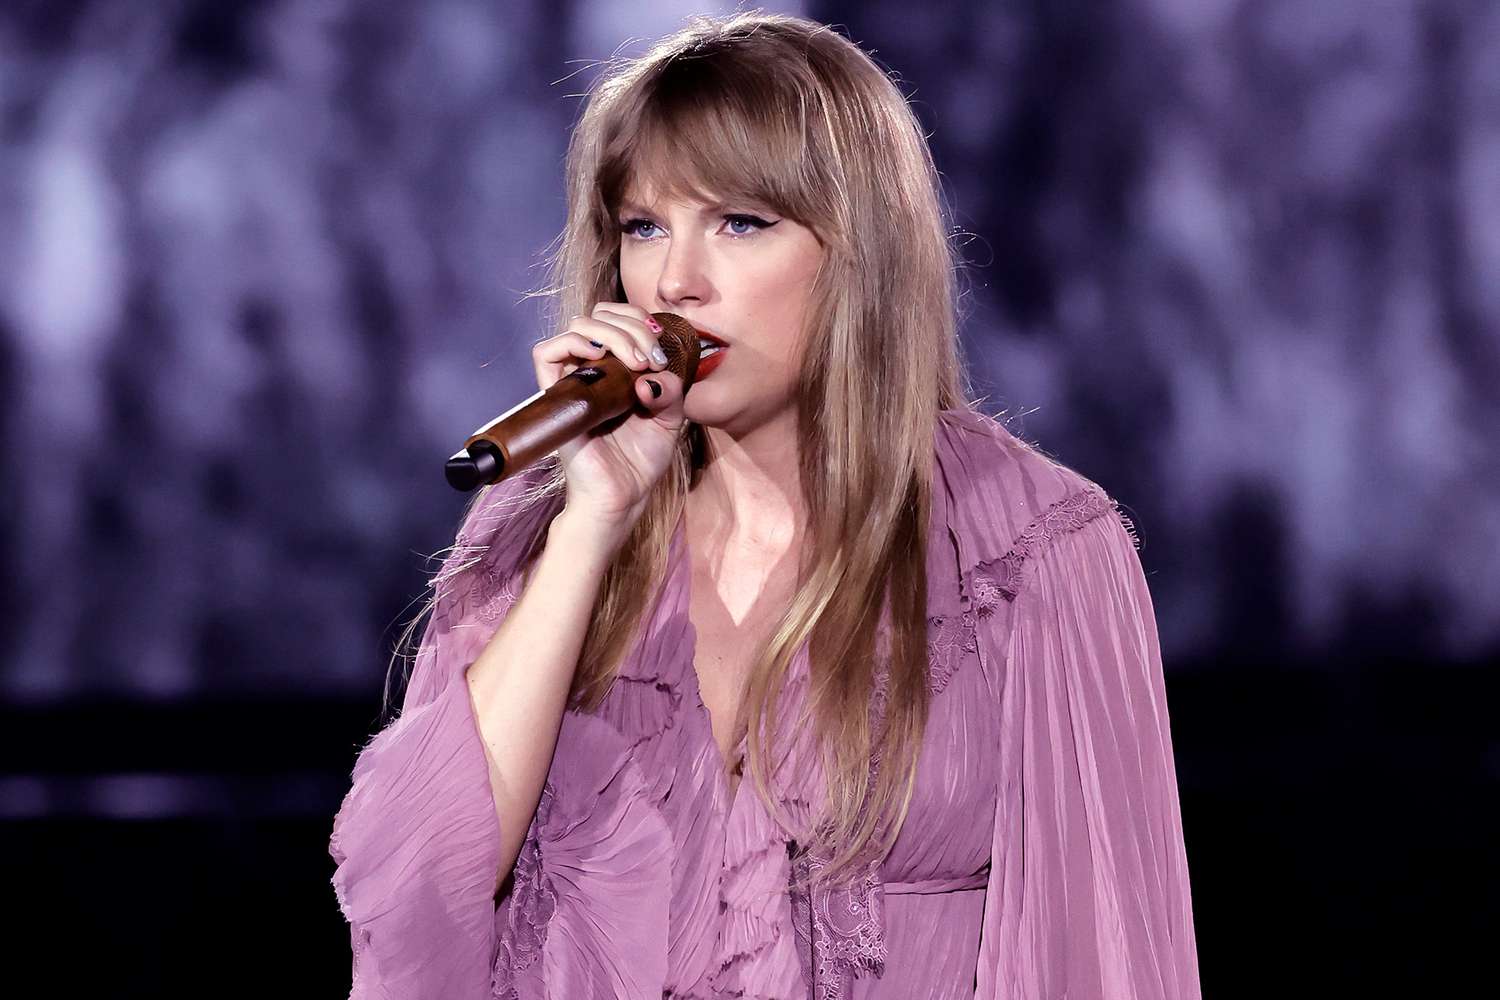 The highest-grossing tour in history finally arrived in Europe on Thursday, May 9 as Taylor Swift kicks off her European dates with four nights in Paris.